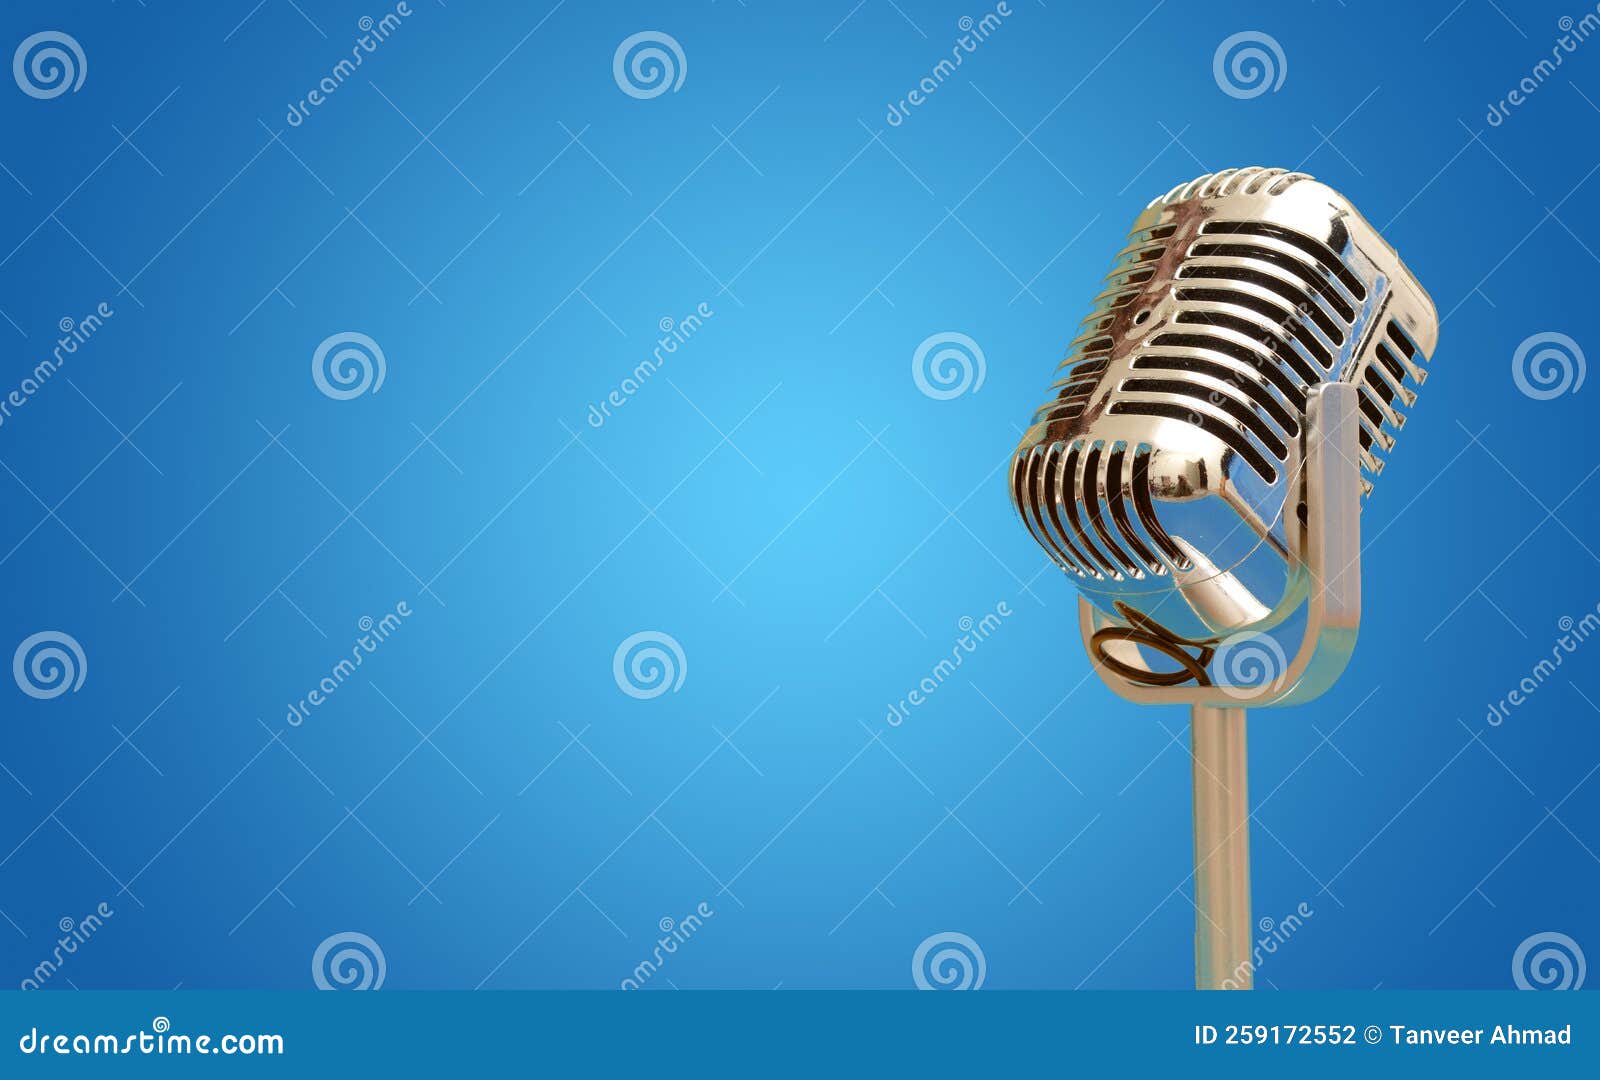 vintage microphone  on blue banner with copy space